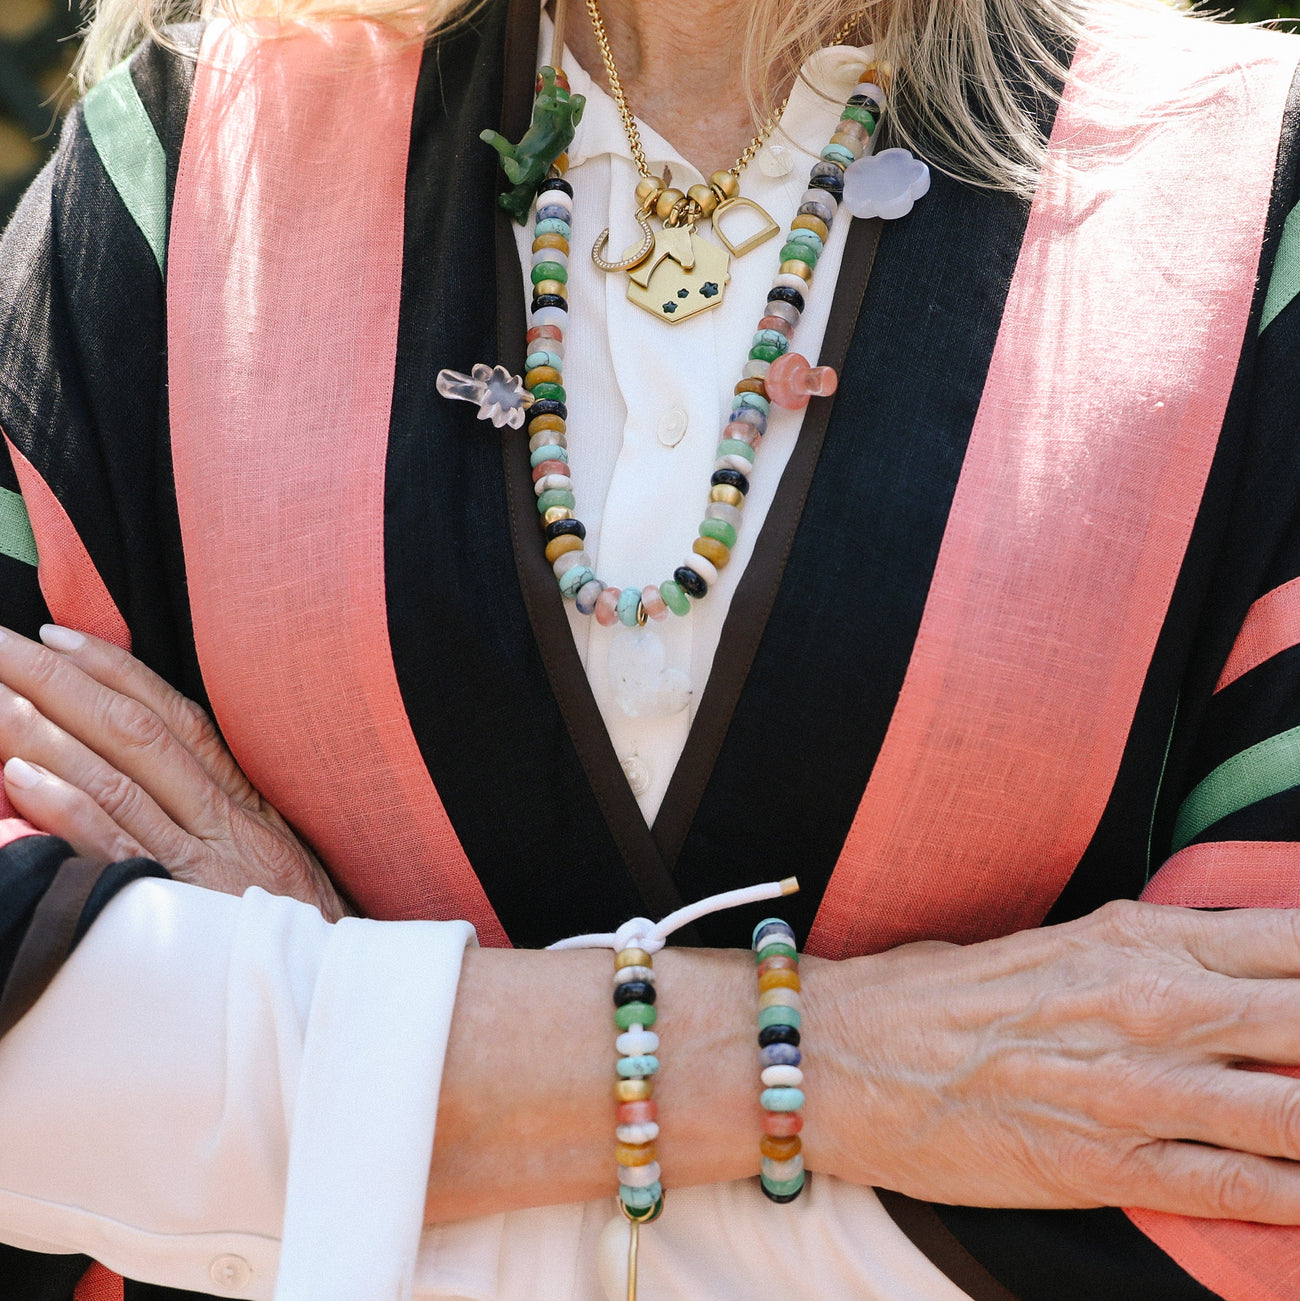 styled necklace and bracelet looks on person wearing pink and black jacket